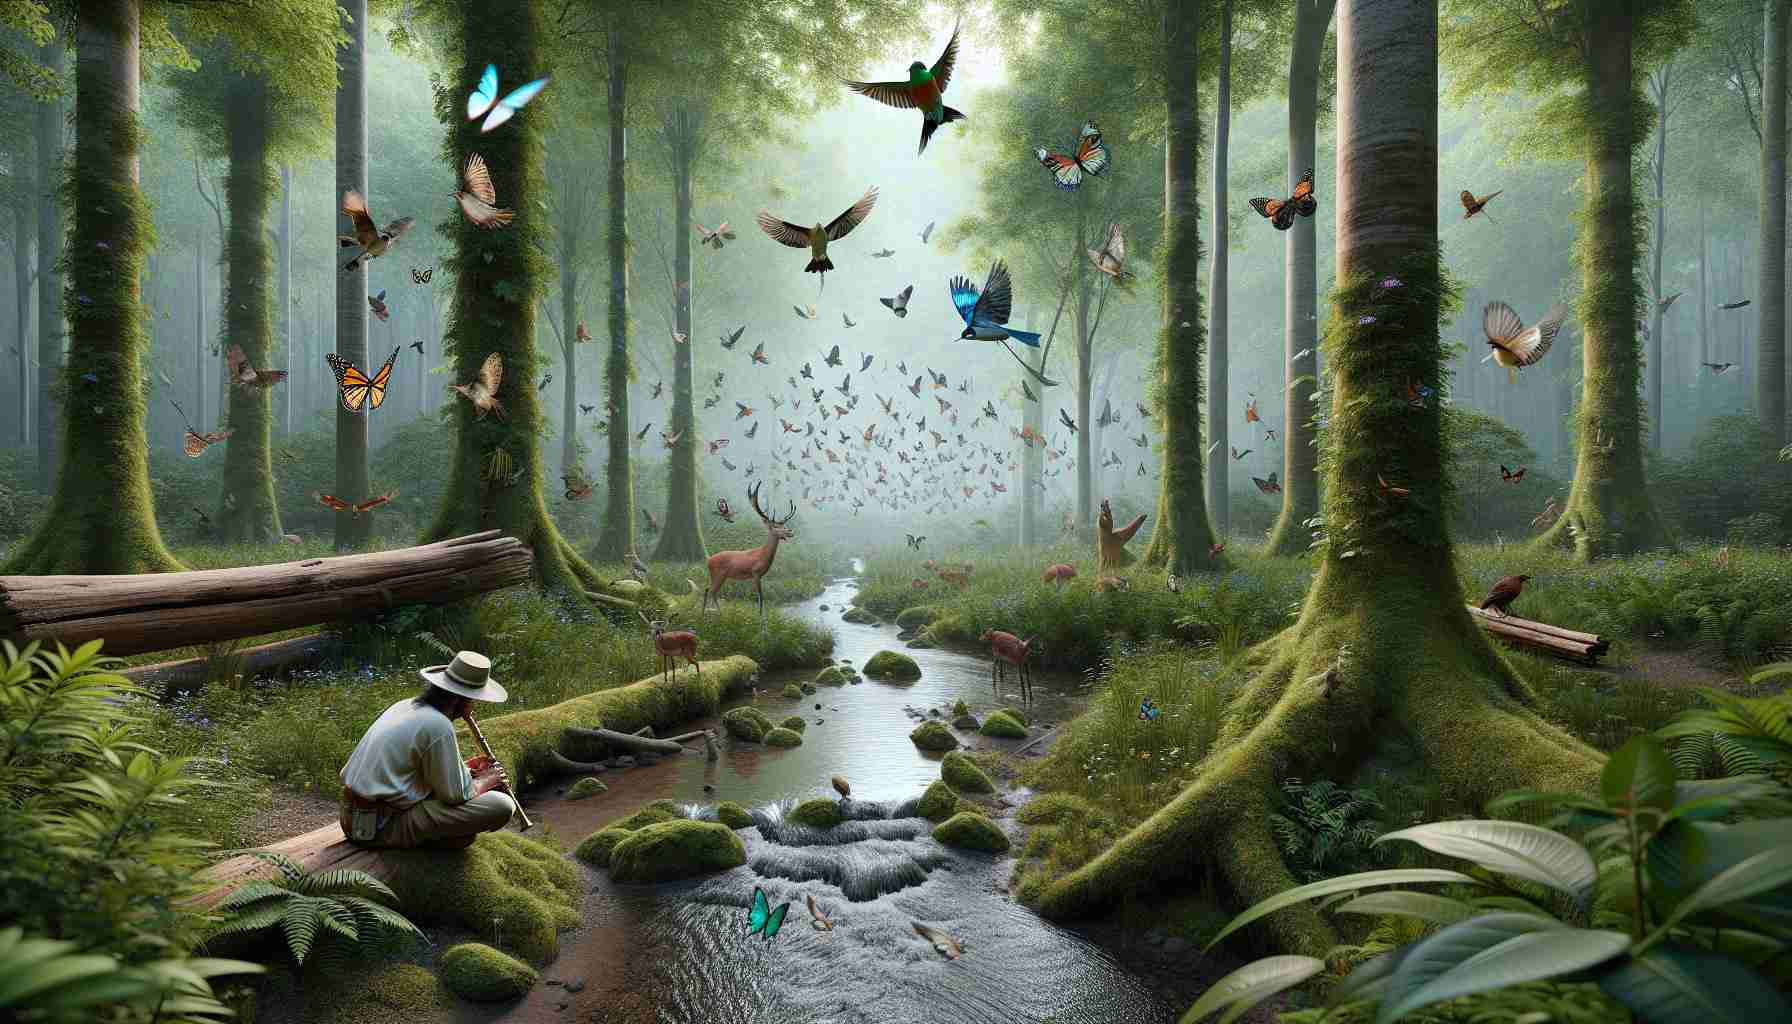 A hyper-realistic, high-definition image capturing a serene scene of nature exploration. There are lush green trees filled with myriad species of birds that sing harmoniously. The melodious cooing and chirping forms the melody of the woodland. A small, tranquil stream flows in the heart of these woods, its gentle gurgling resonating through the stillness. On the banks, you can see a person of Hispanic descent attentively tuning in to the symphony of nature, with a rustic handmade flute in their hand. Hovering butterflies decorate the air and a distant deer walks the foliage, contributing to the vibrant and soothing soundscape.